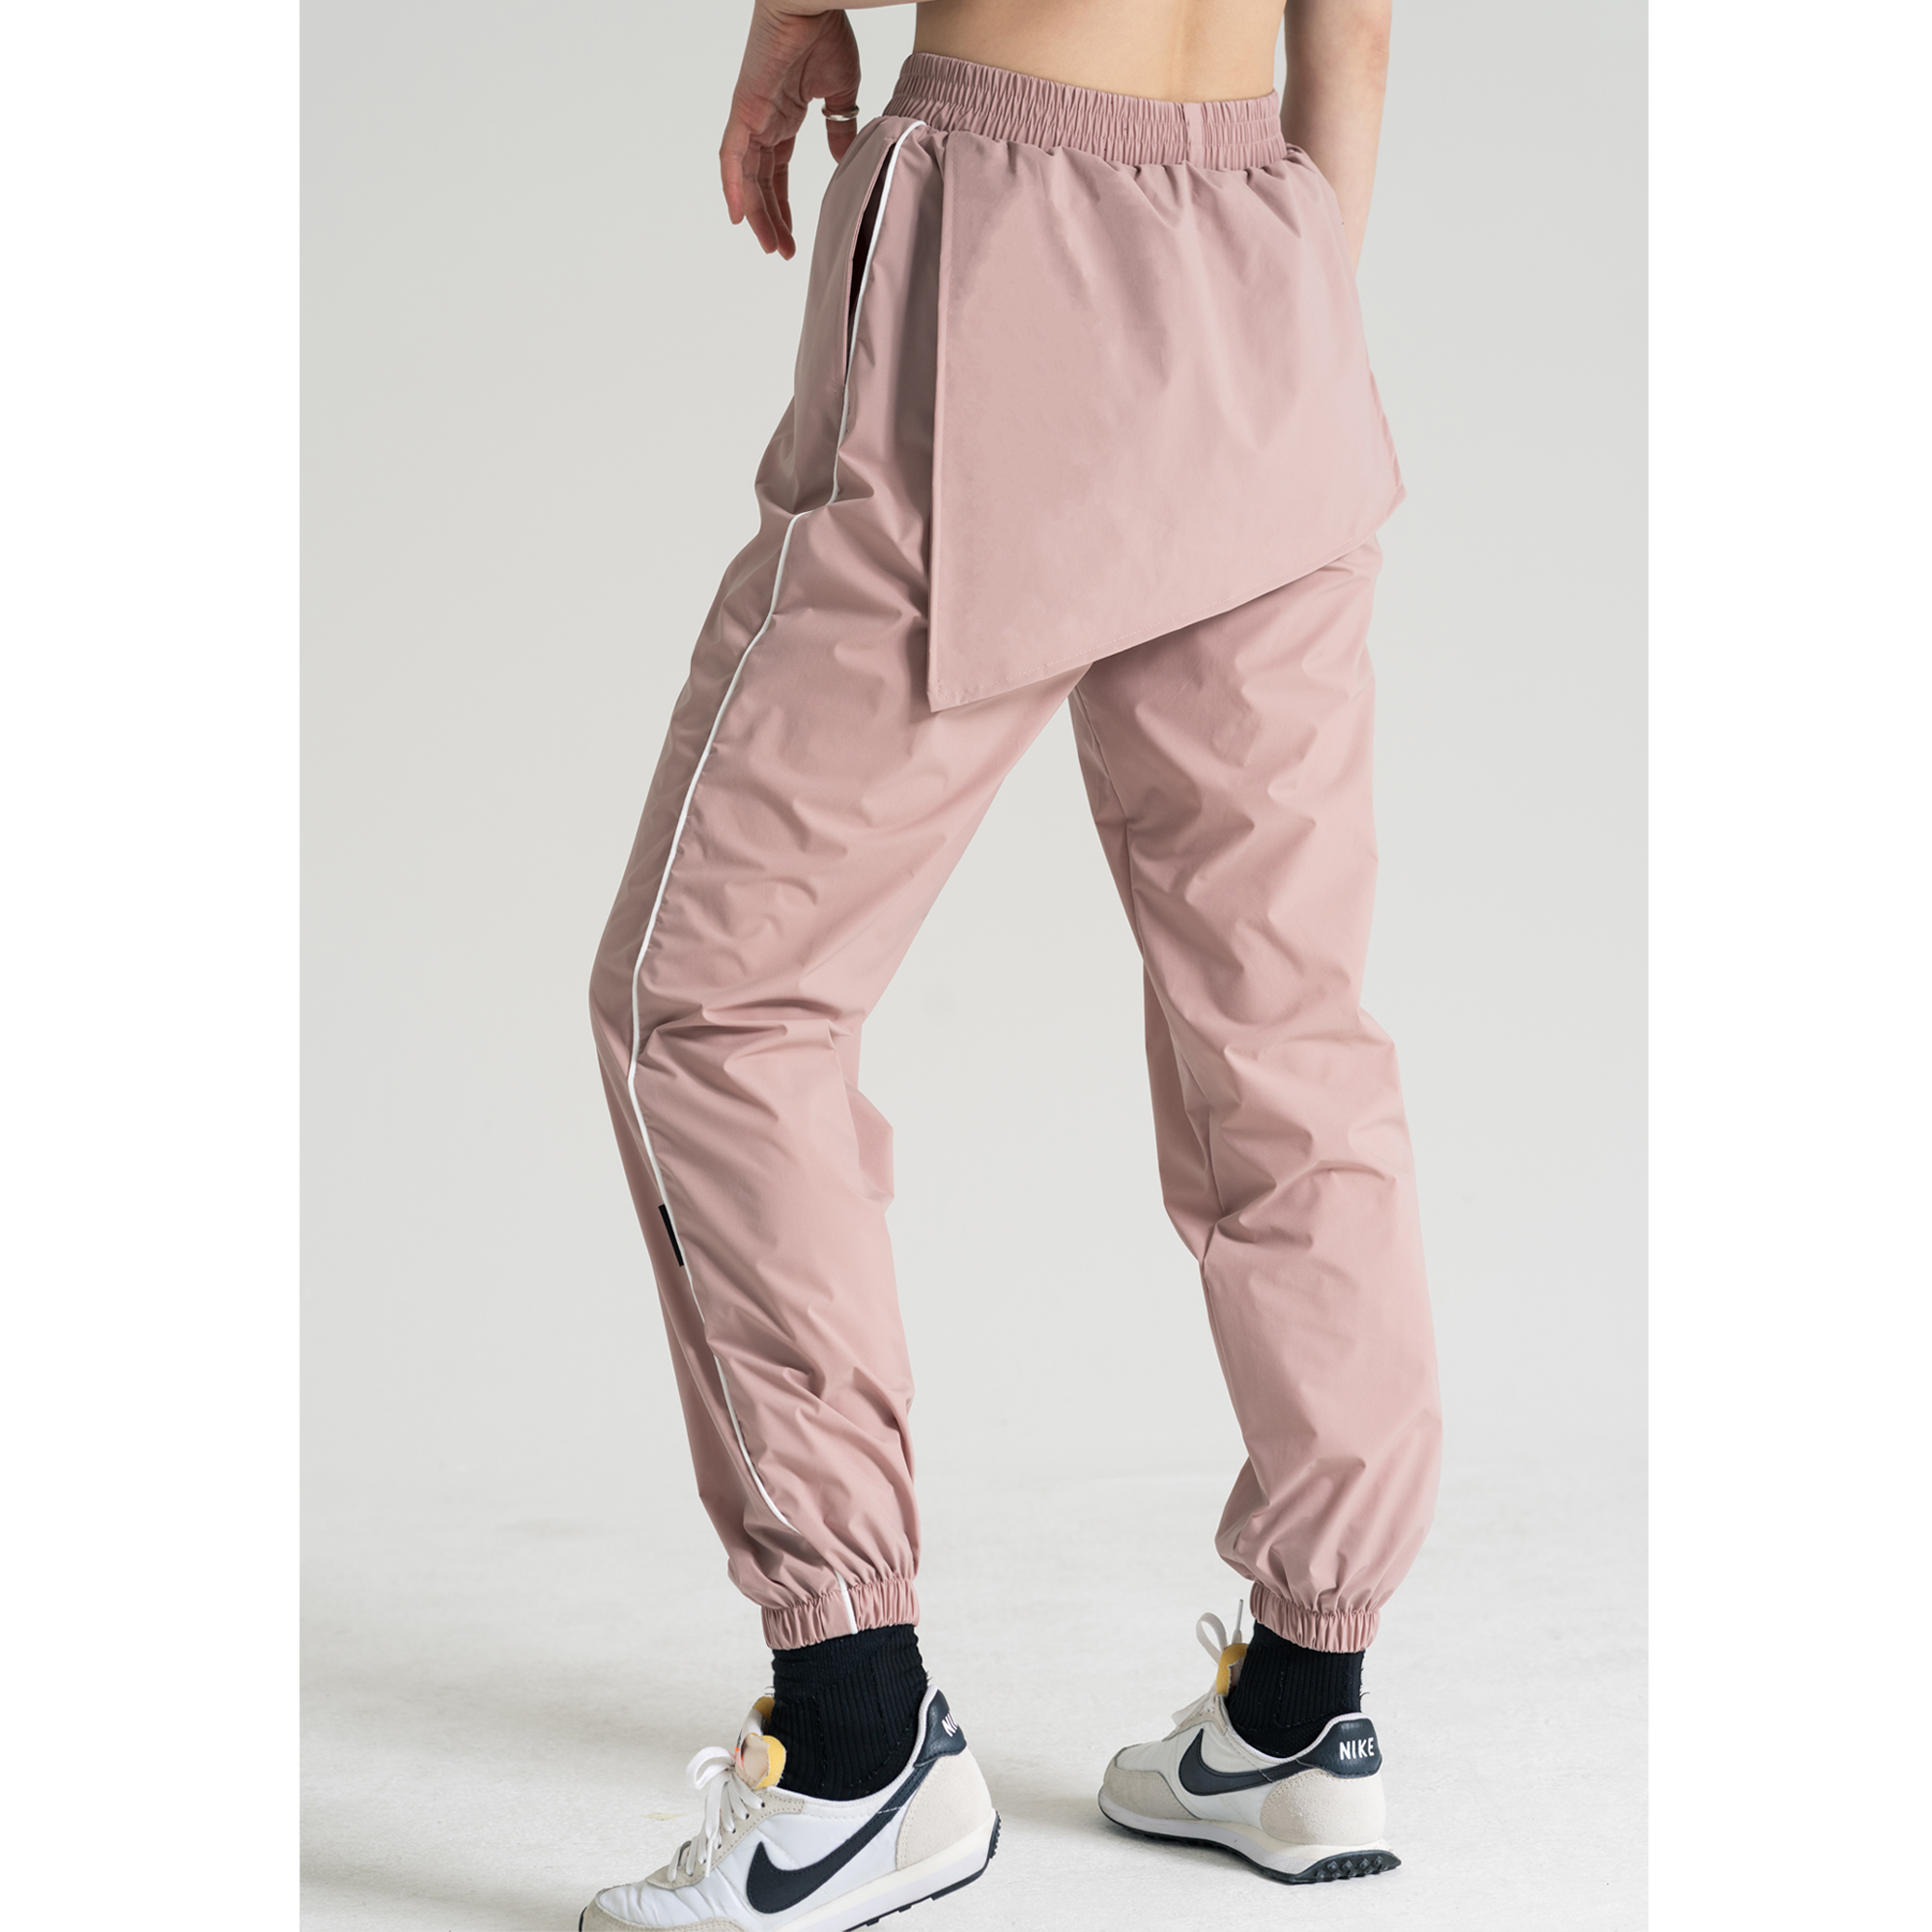 Creamy Hip Cover Joger Pants Rose Pink